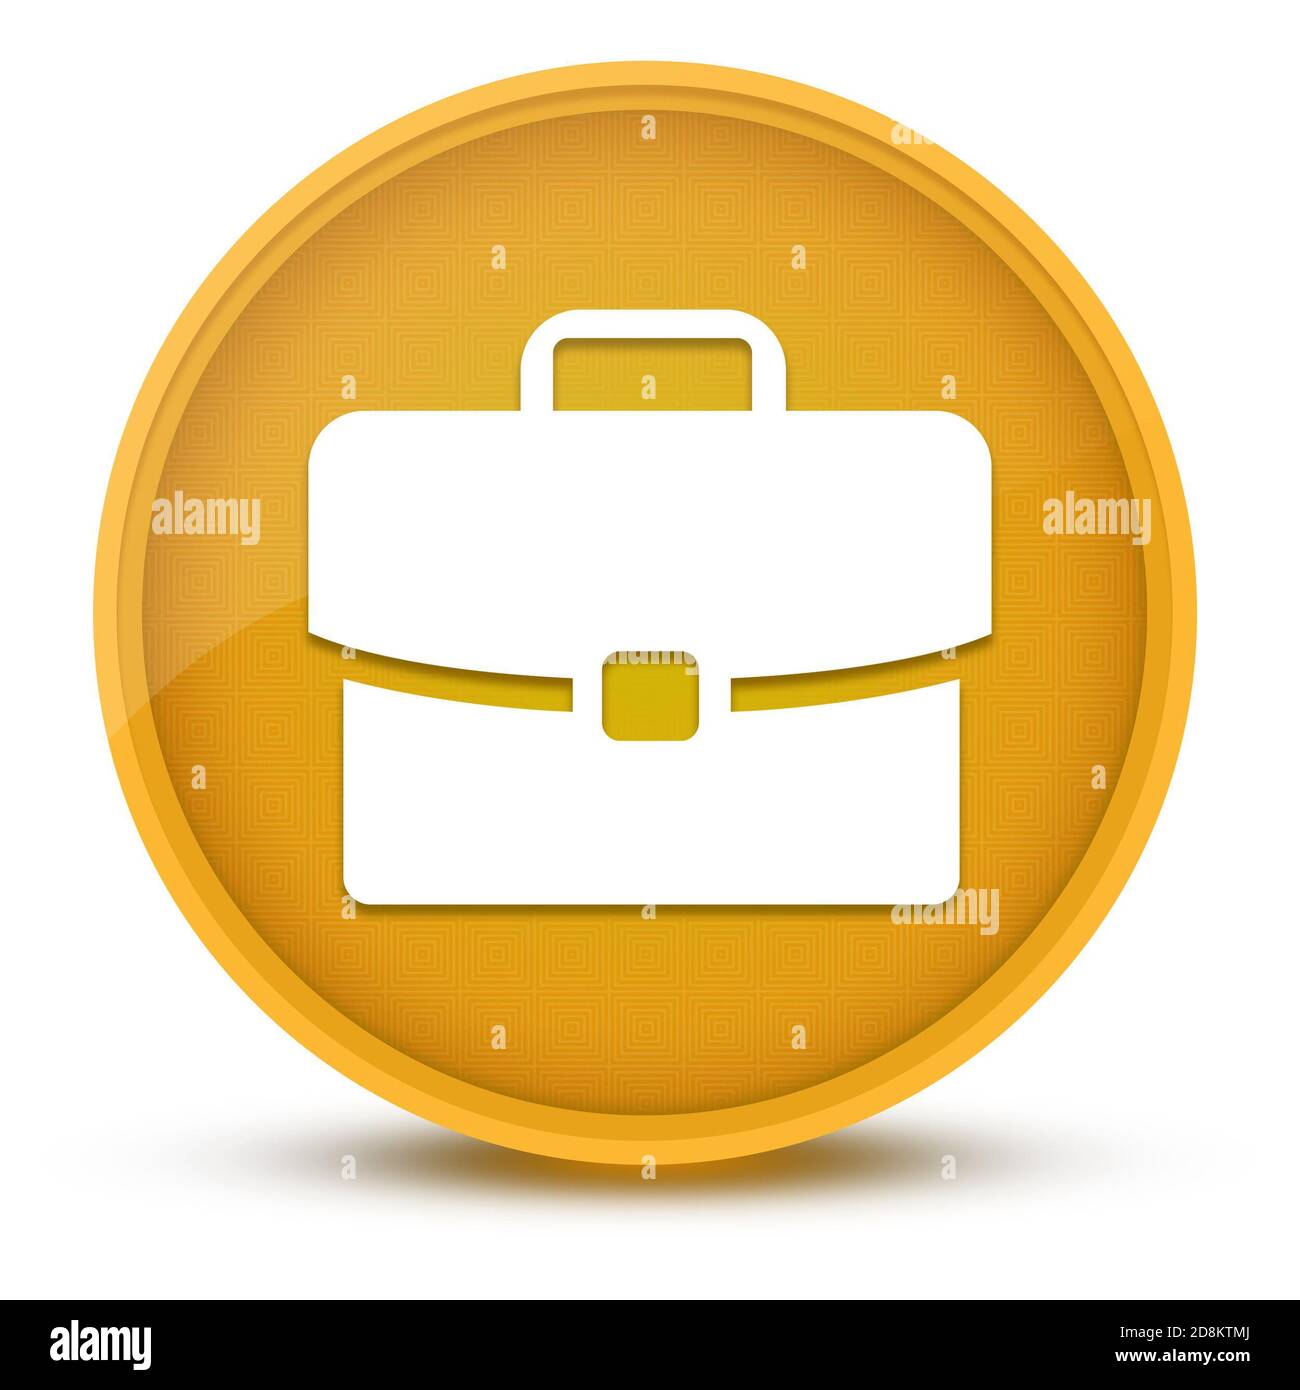 Work experience luxurious glossy yellow round button abstract illustration Stock Photo